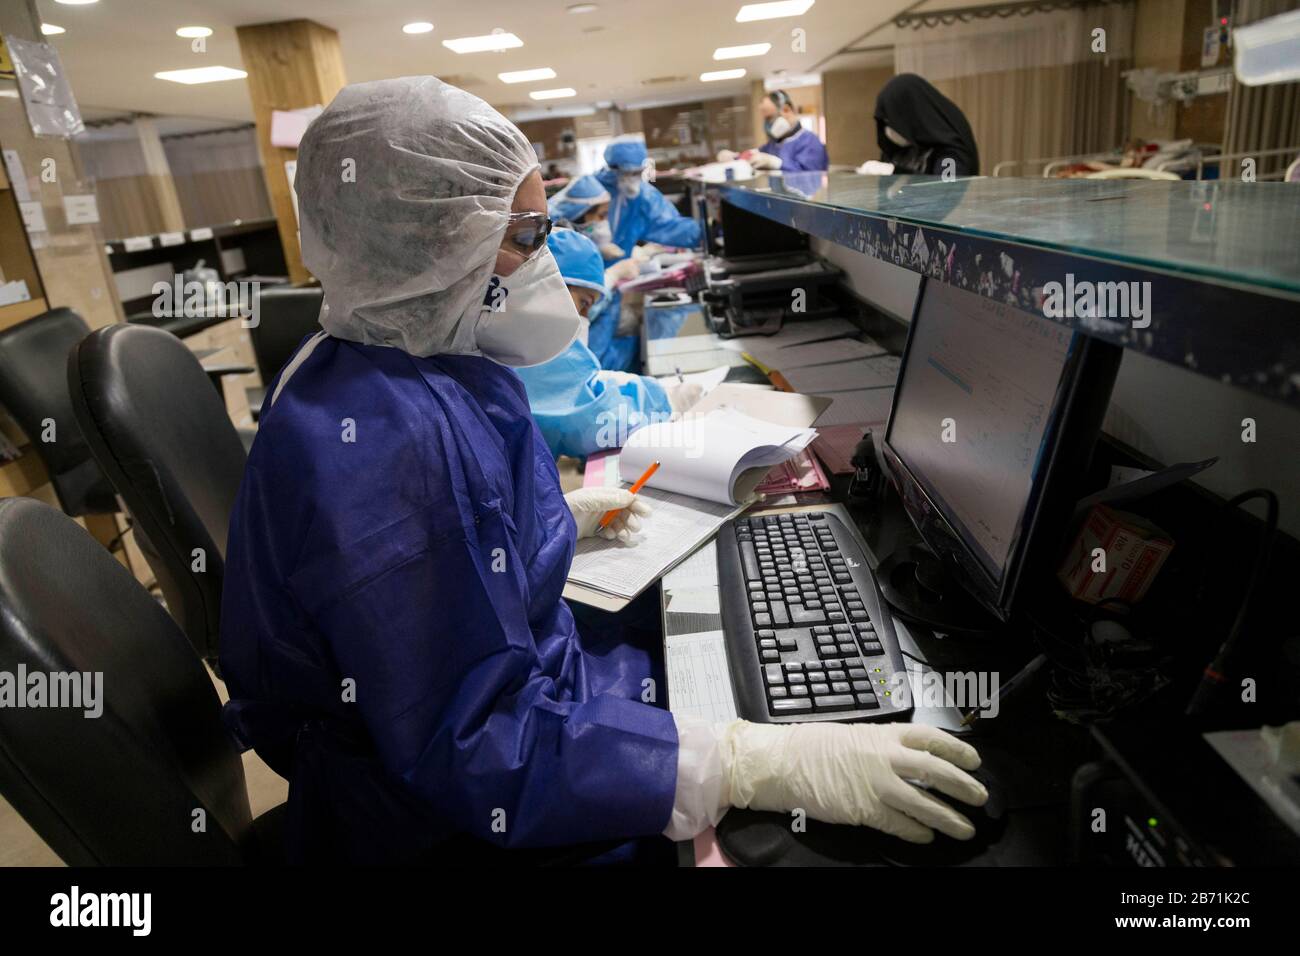 Tehran, Iran. 12th Mar, 2020. Medics and nurses wearing masks and hazmat suits treat patients infected with the new coronavirus COVID-19, at Sina hospital in southern Tehran, Iran. According to the last report by the Ministry of Health, 10,075 people were diagnosed with the Covid-19 coronavirus and 429 people have died in Iran. The outbreak has infected a host of senior officials, politicians, clerics and members of the Revolutionary Guards in Iran, the fourth worst-affected nation after China, South Korea, and Italy. Credit: ZUMA Press, Inc./Alamy Live News Stock Photo